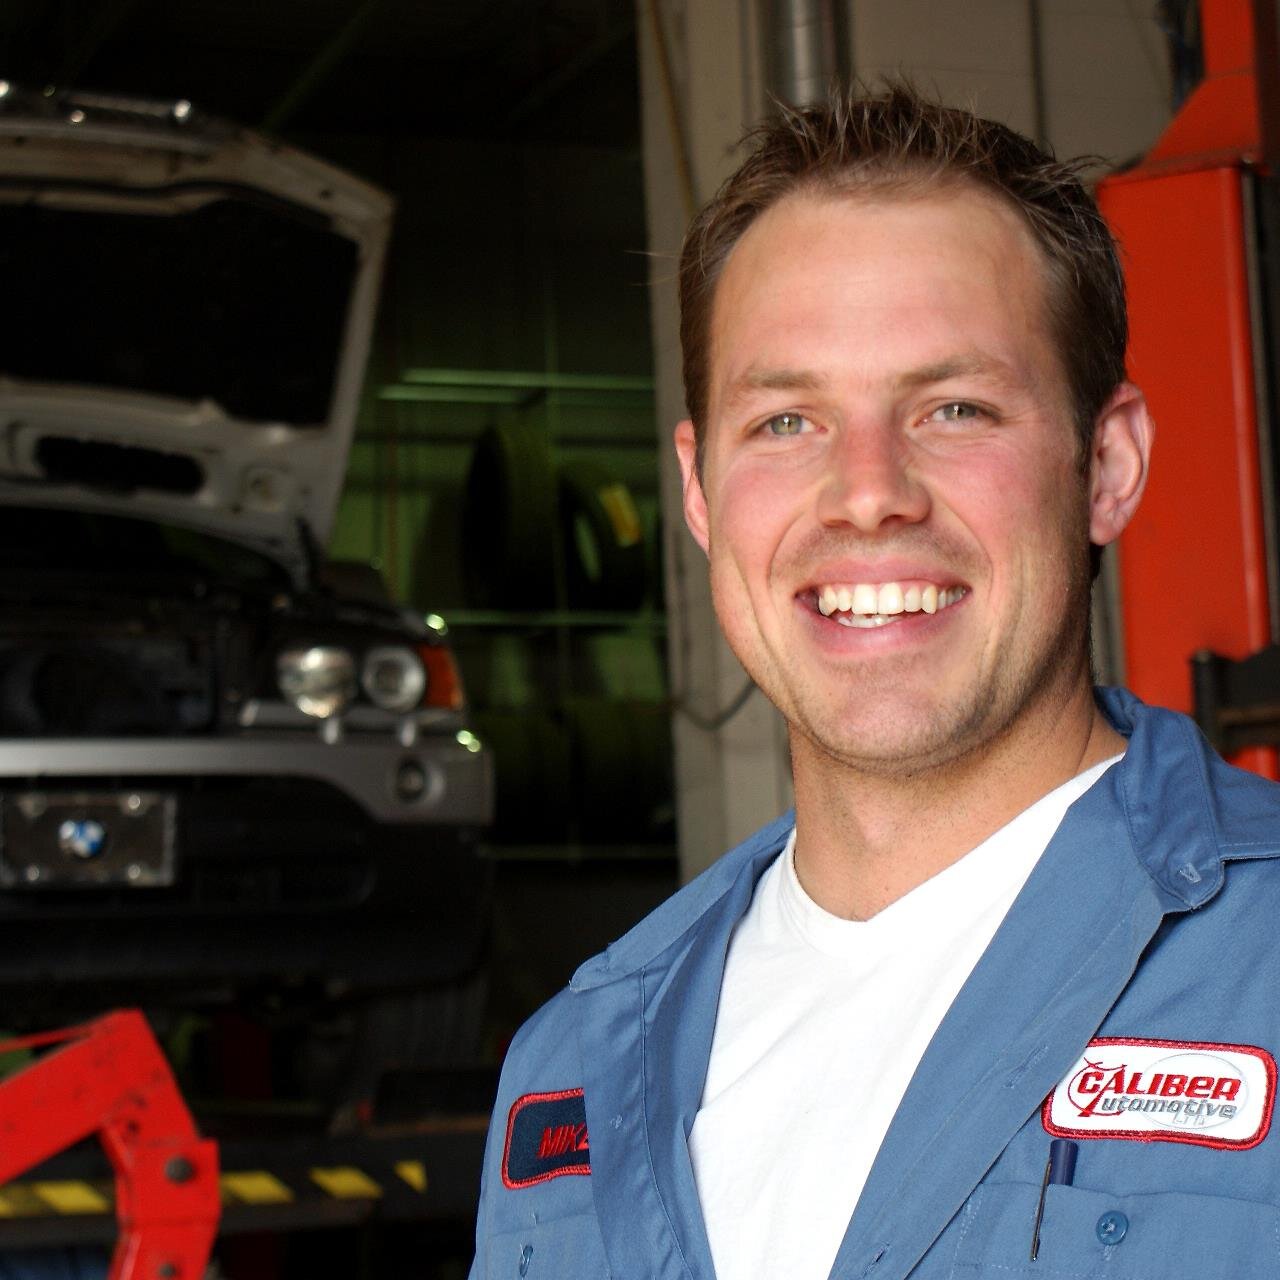 Caliber automotive provides automotive service and repair in Edmonton. our absolute commitment to customer satisfaction is what makes us unique.